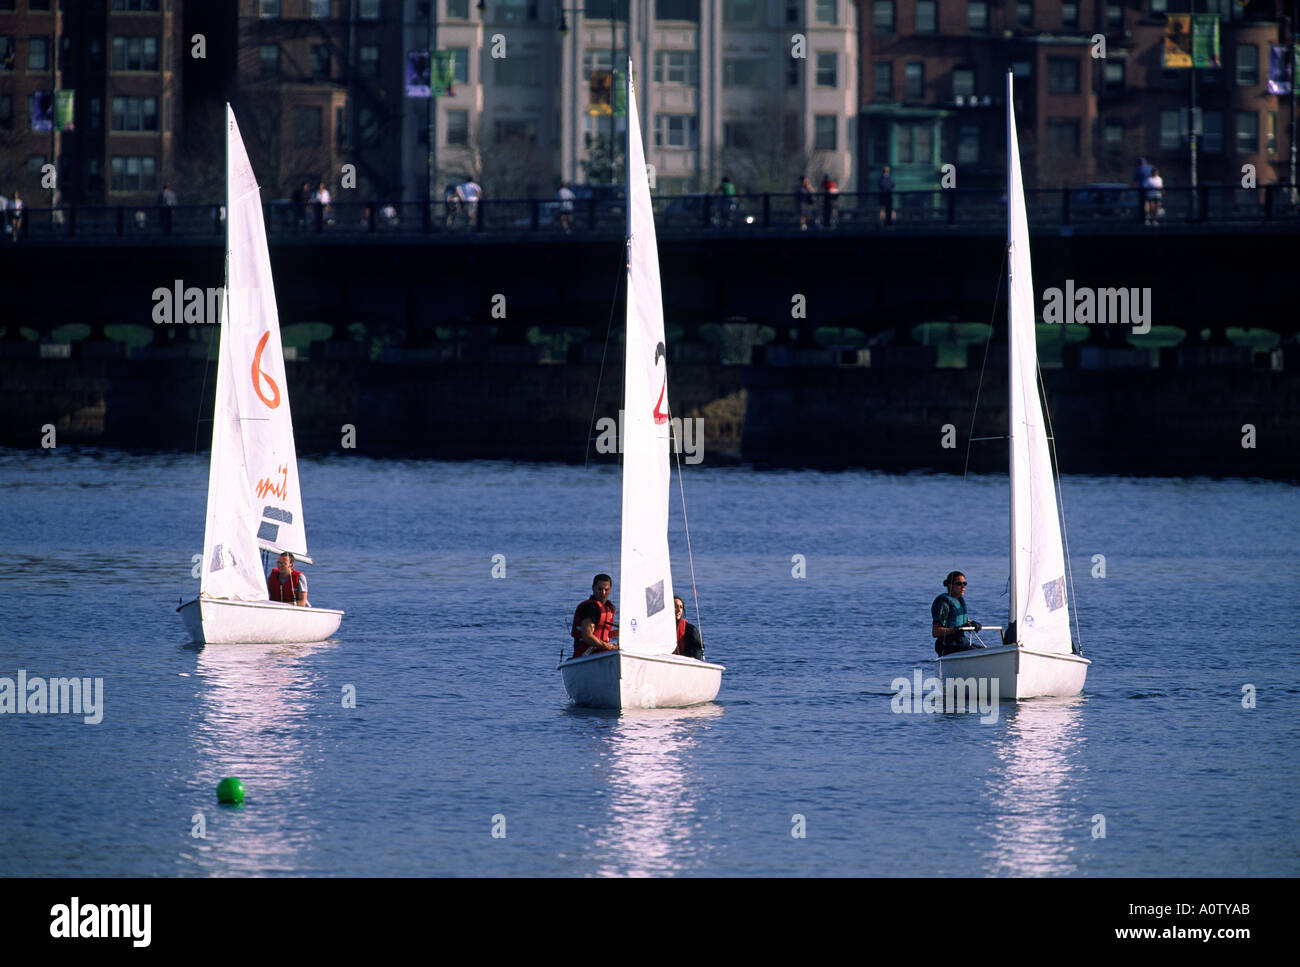 Sail boats on the Charles river in Boston Stock Photo